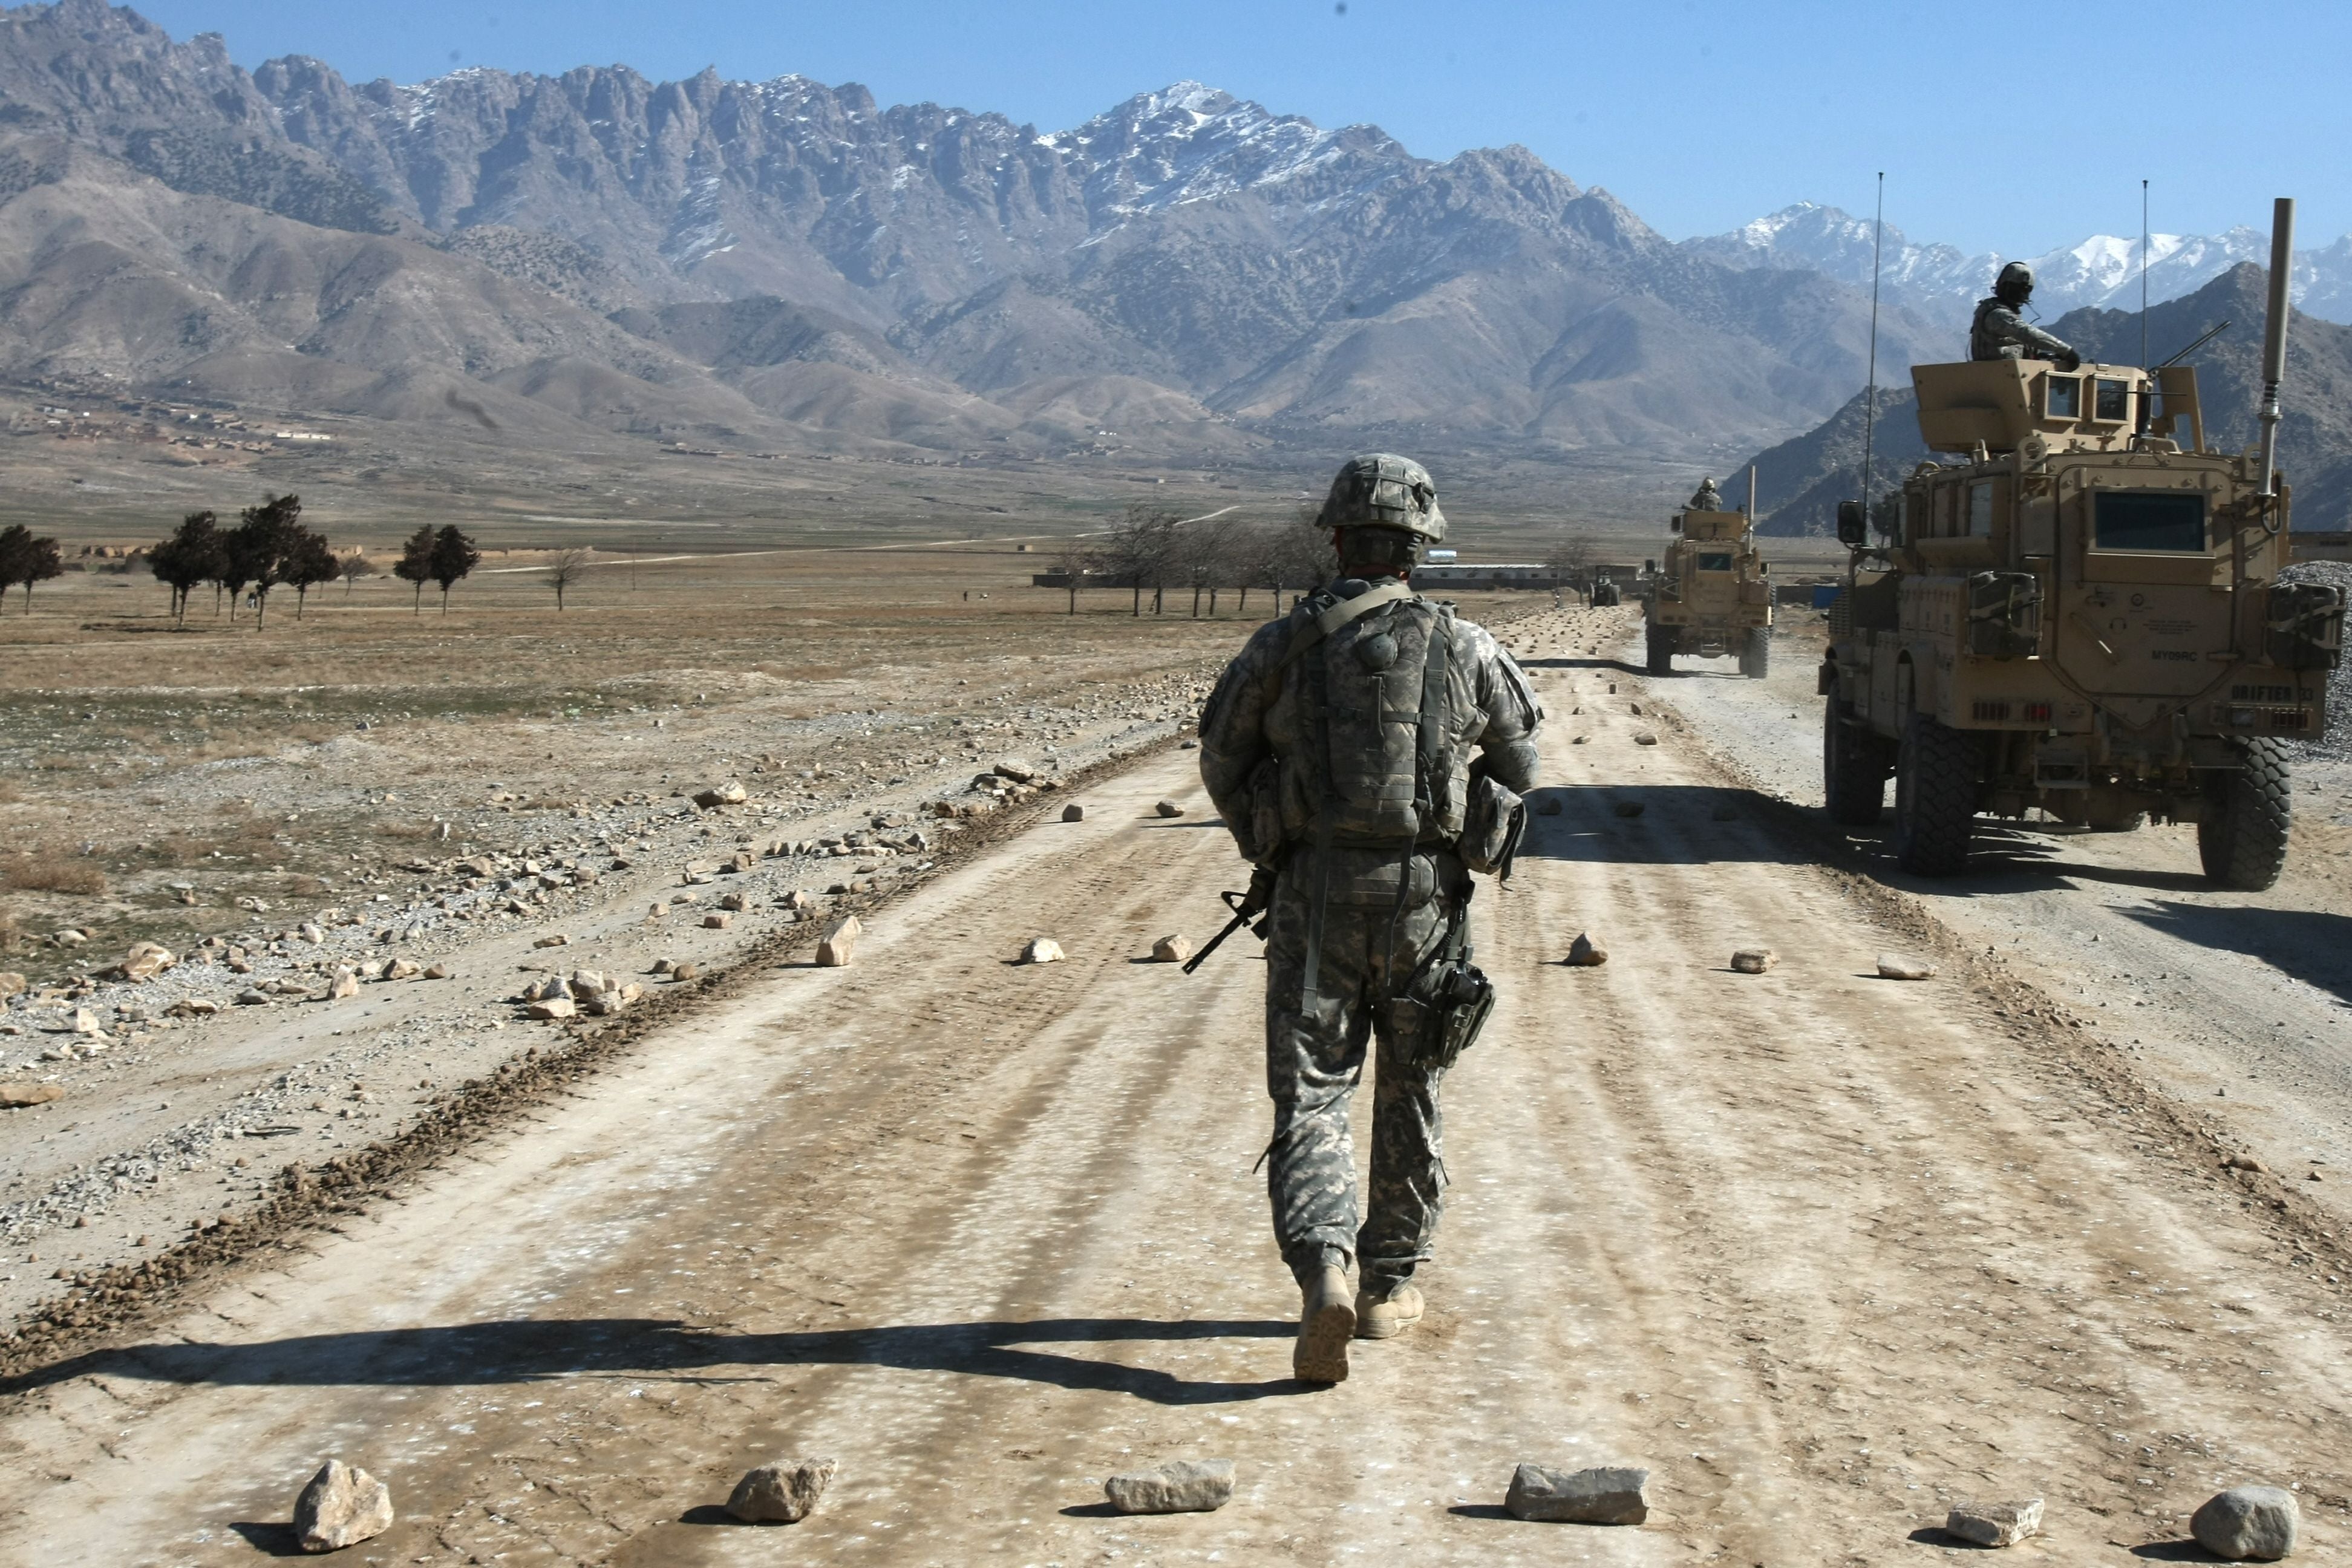 A US soldier from a protection squad for a PRT (Provincial Reconstruction Team) walks along a road under construction near Bagram, about 60 km from Kabul in 2010